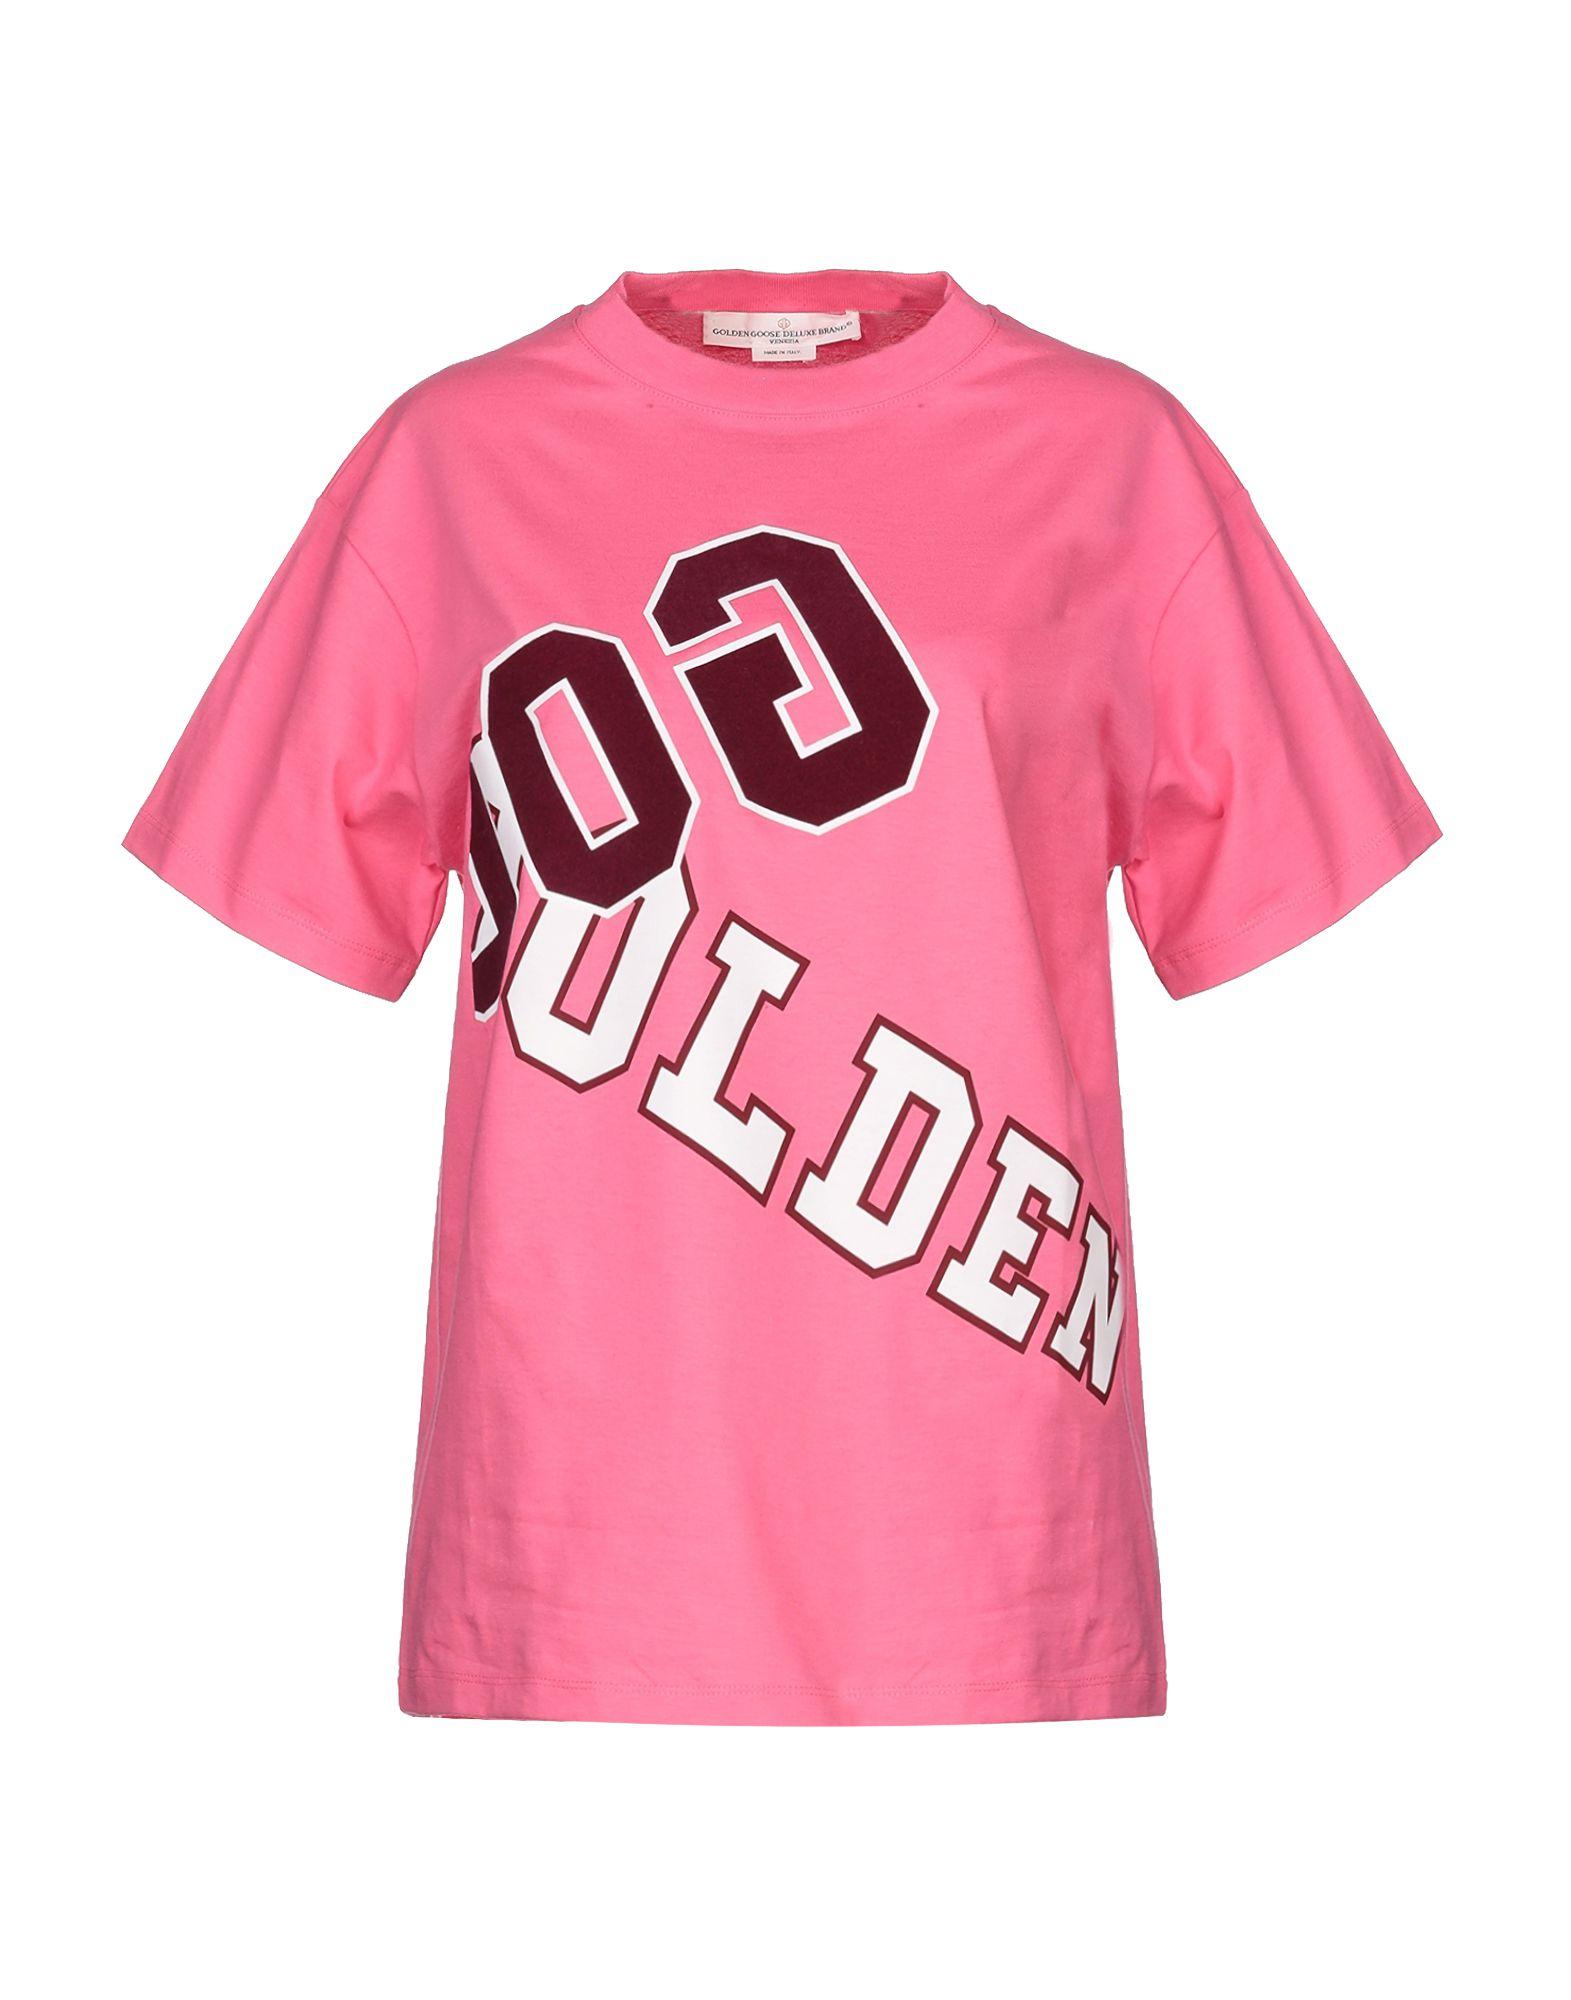 Golden Goose Deluxe Brand Logo Printed Cotton T-shirt in Pink & Purple ...